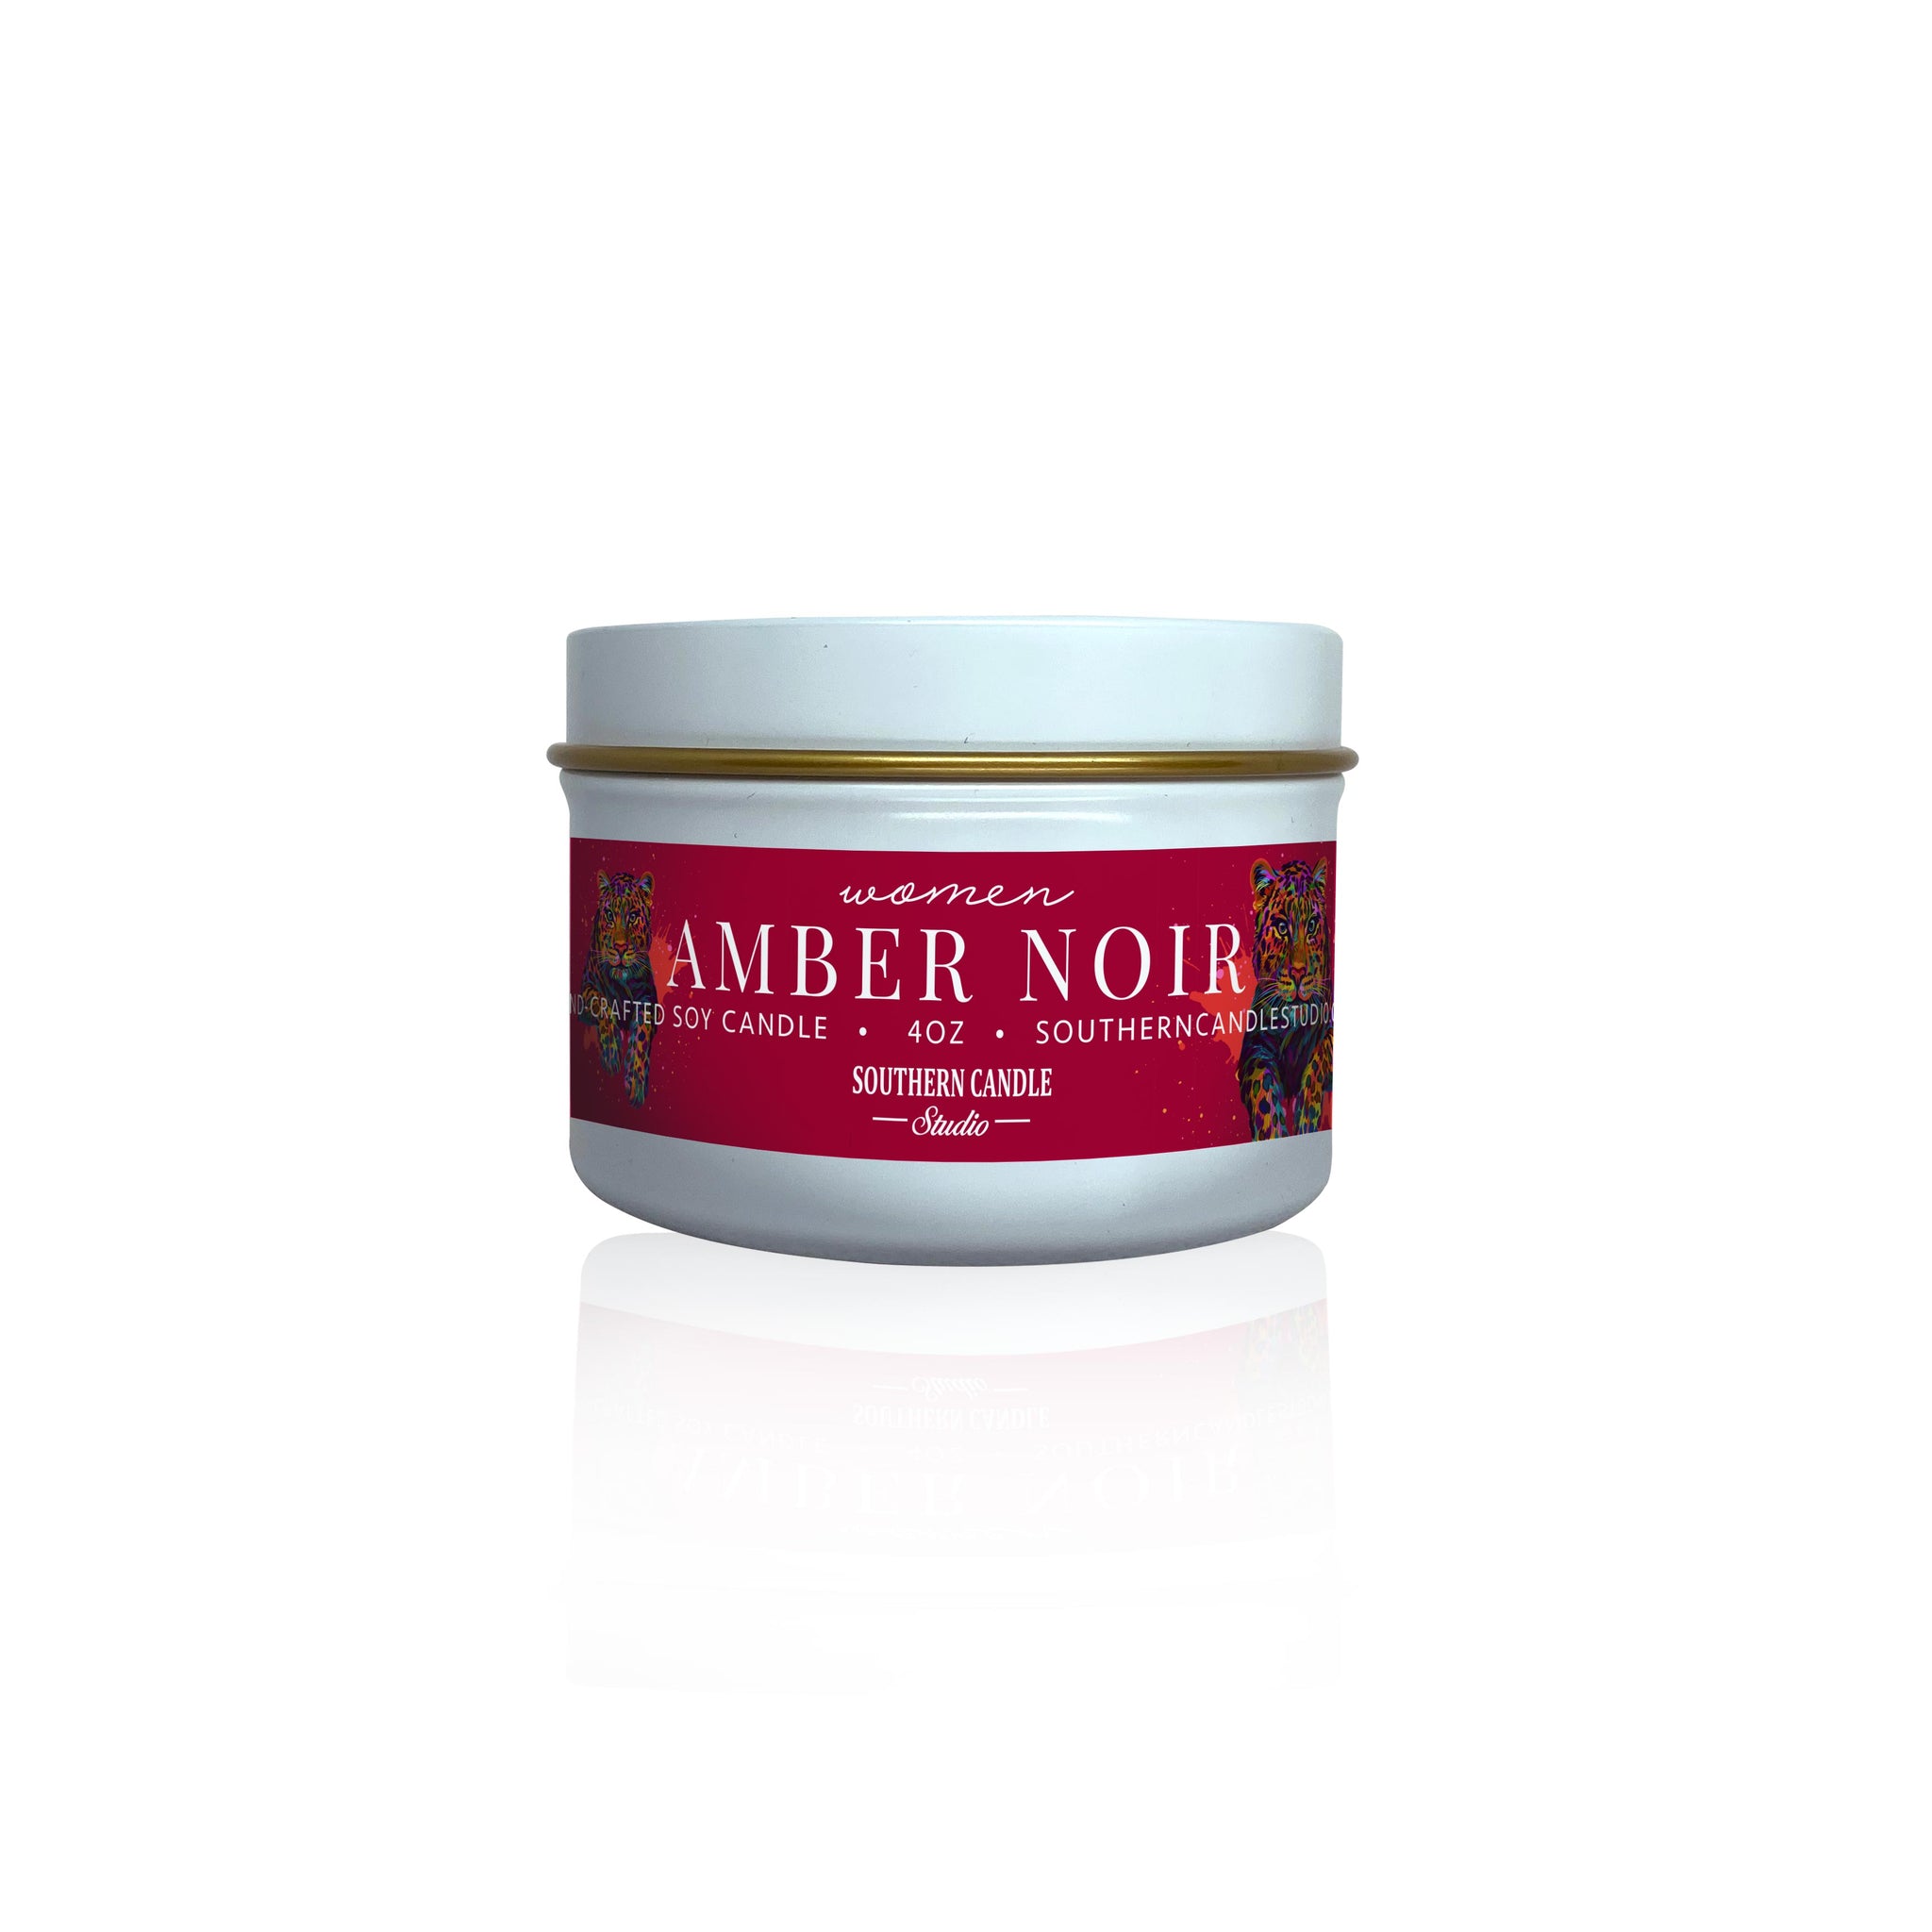 Amber - Cocoa Butter Candle 140g – Corineus Candles